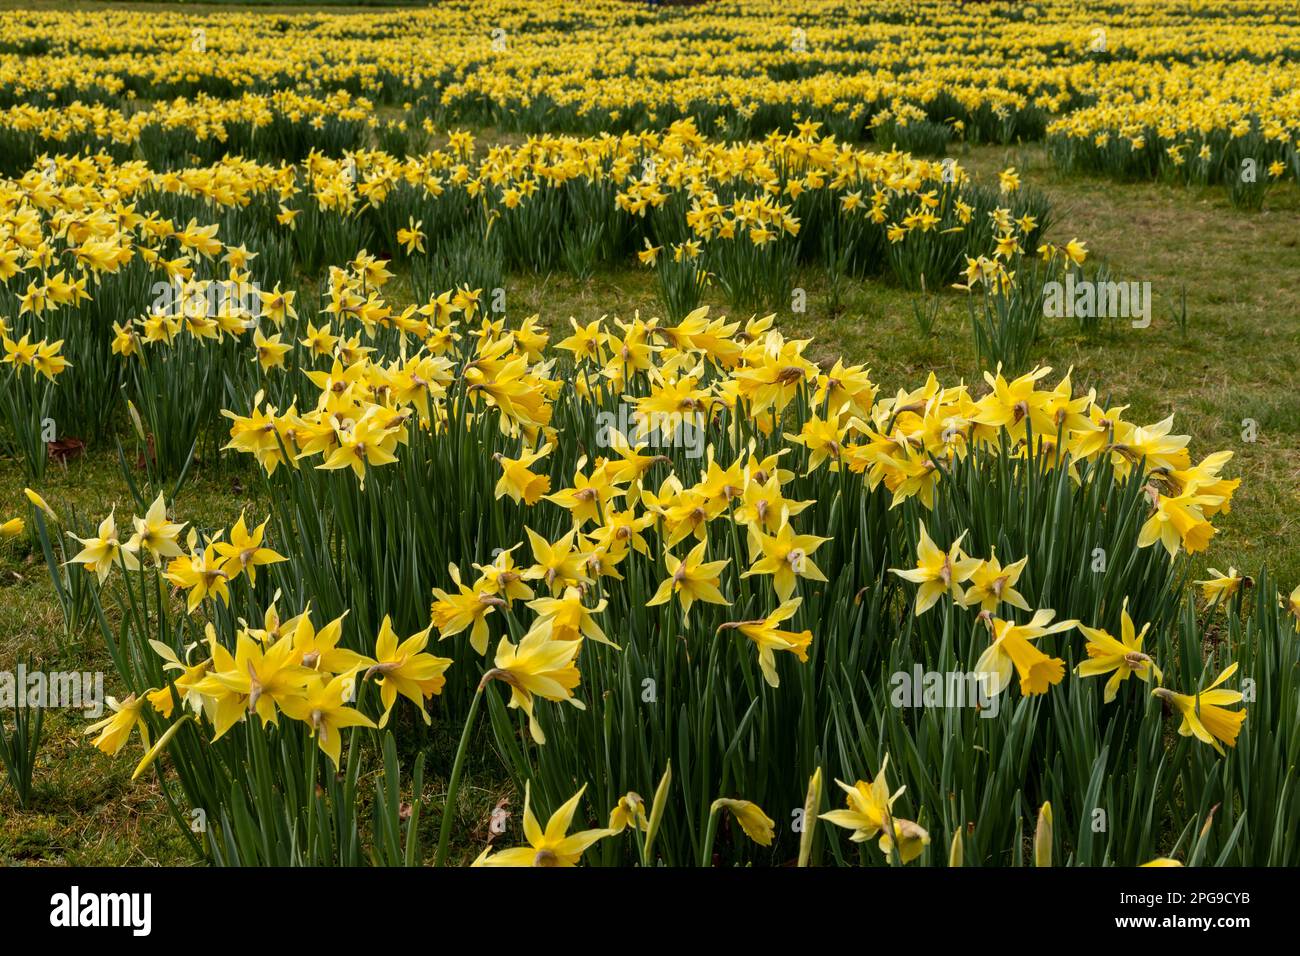 Blooming Daffodil flowers in spring Stock Photo